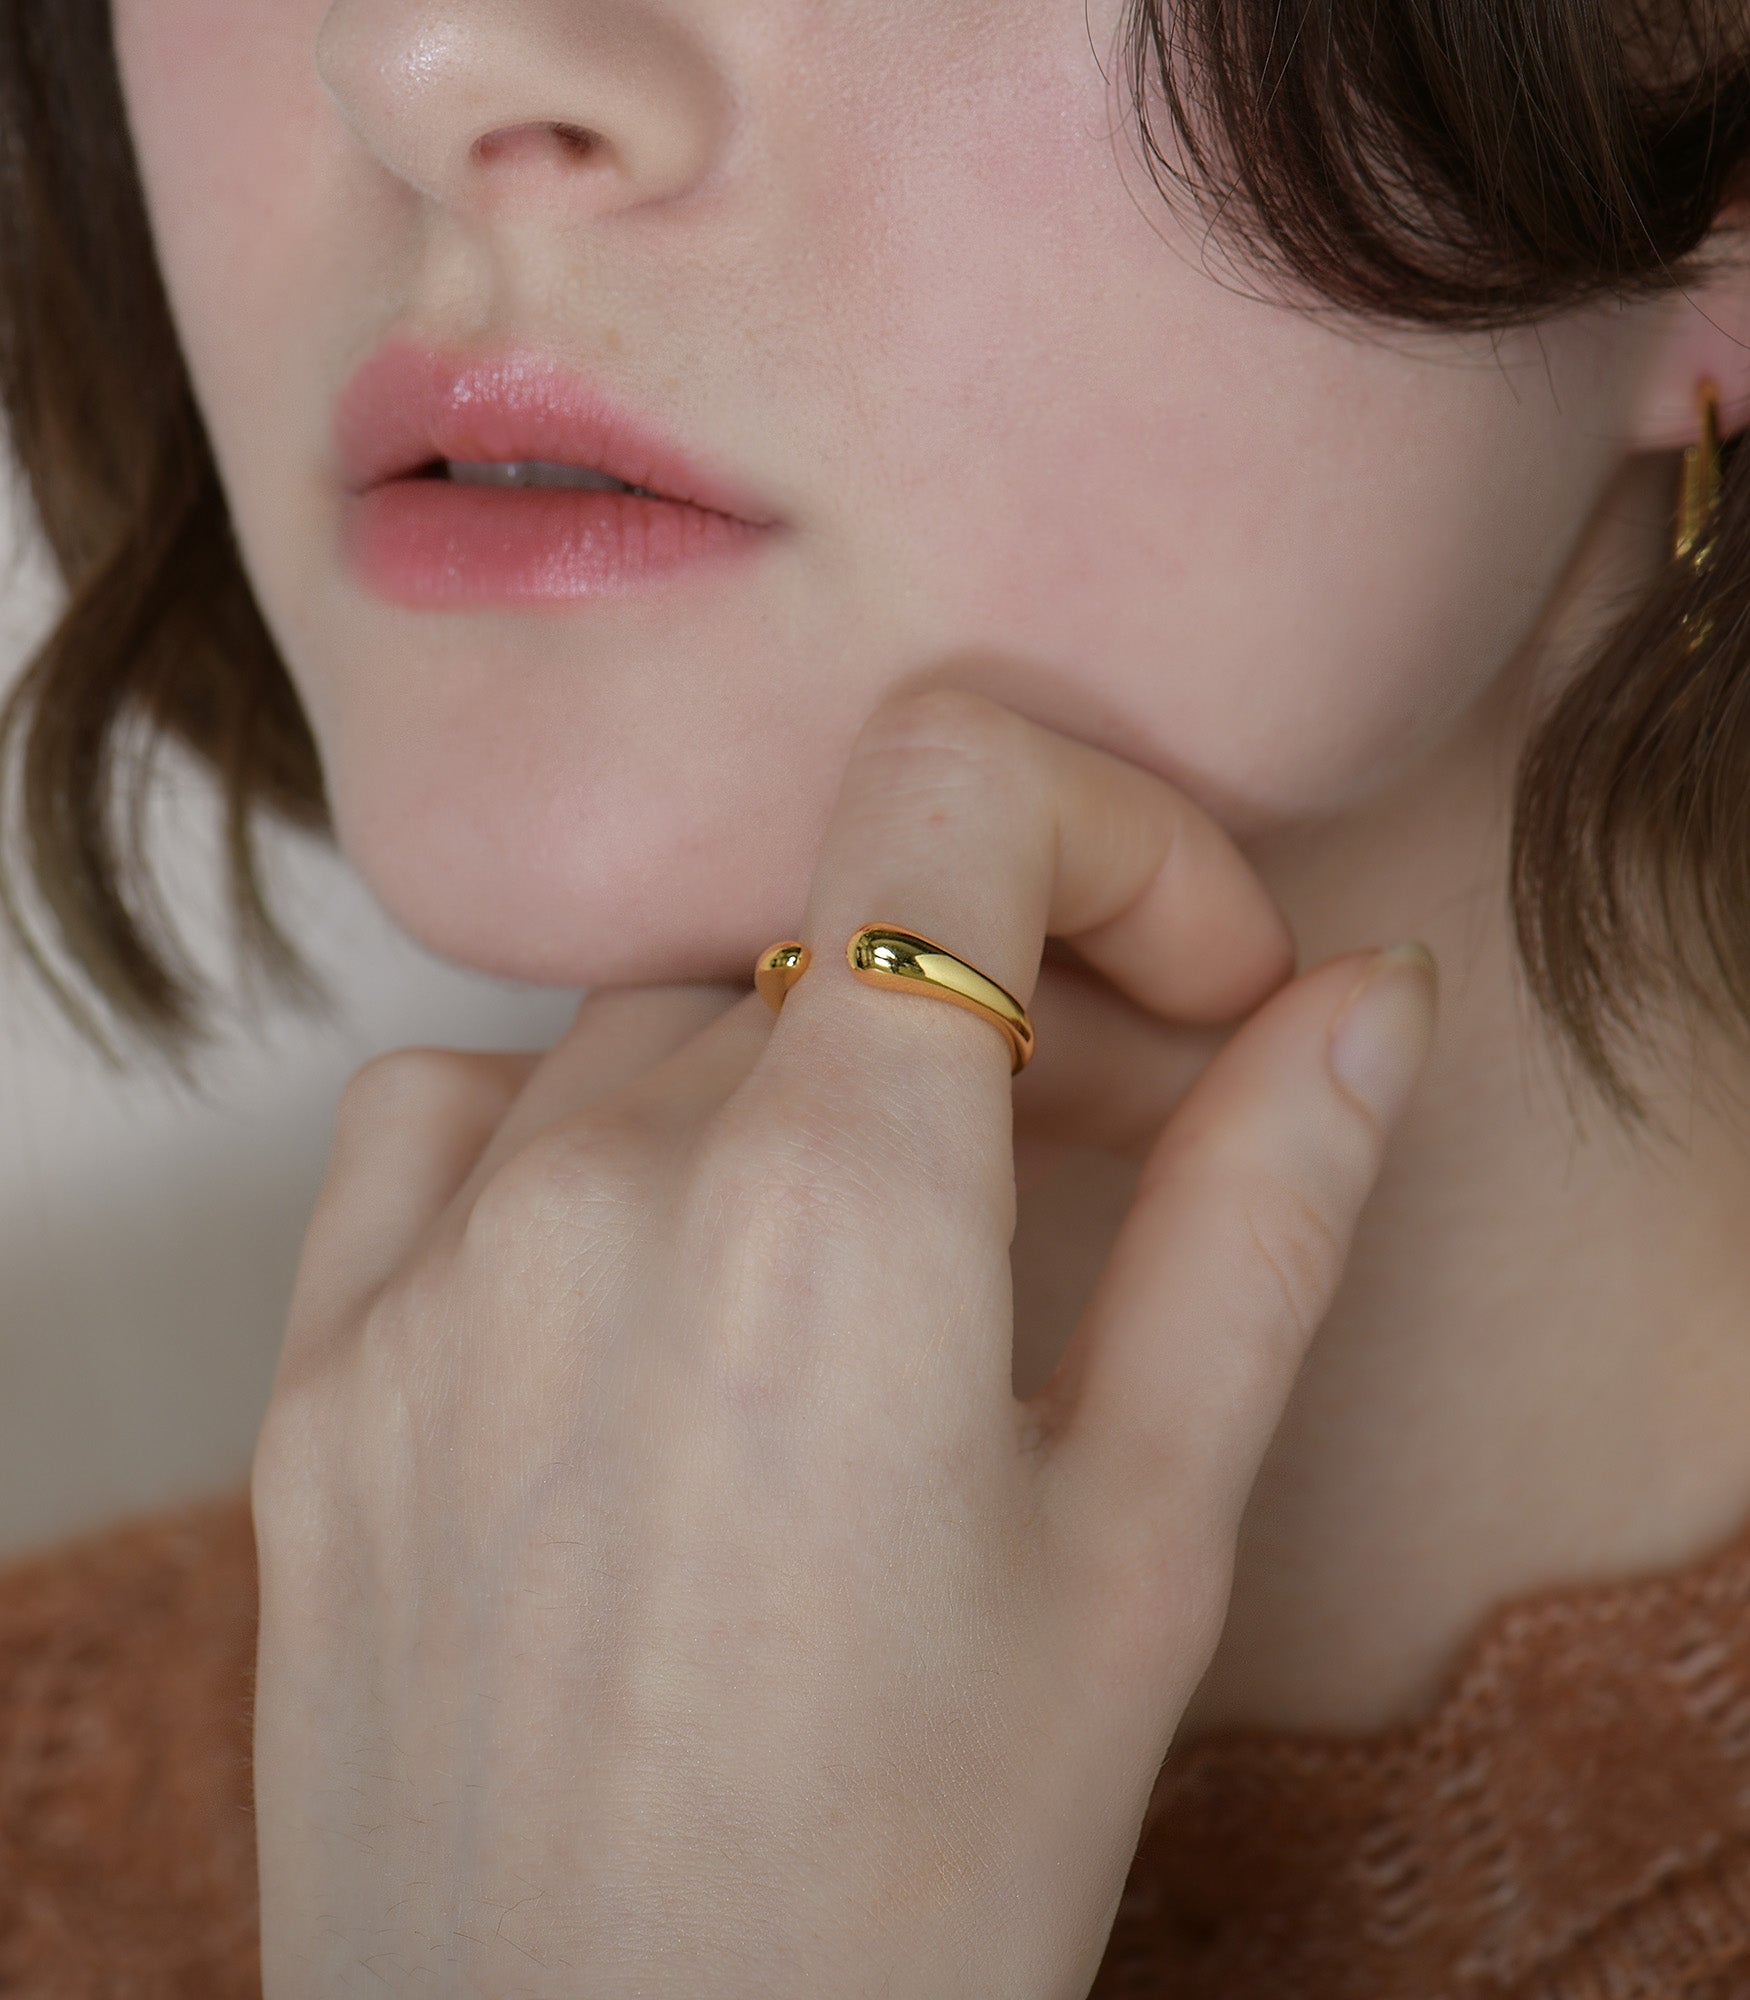 A model wears a polished, gold vermeil ring with a minimalistic design.